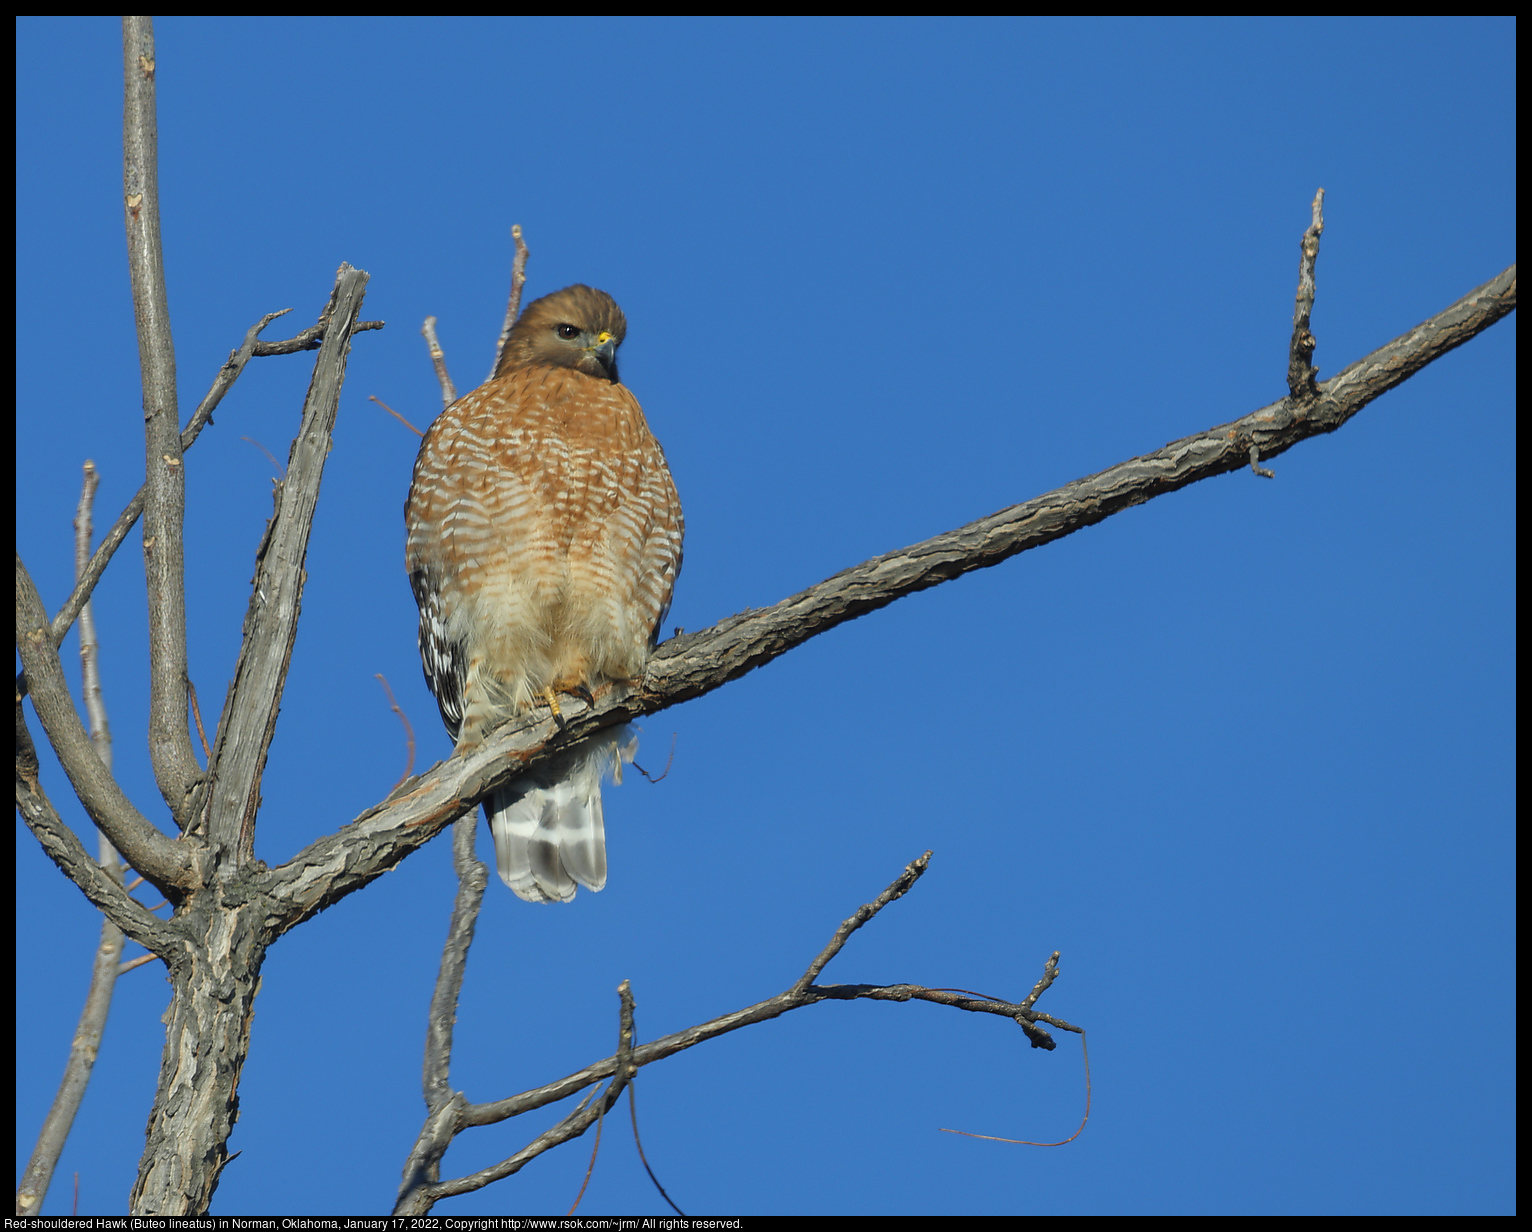 Red-shouldered Hawk (Buteo lineatus) in Norman, Oklahoma, January 17, 2022